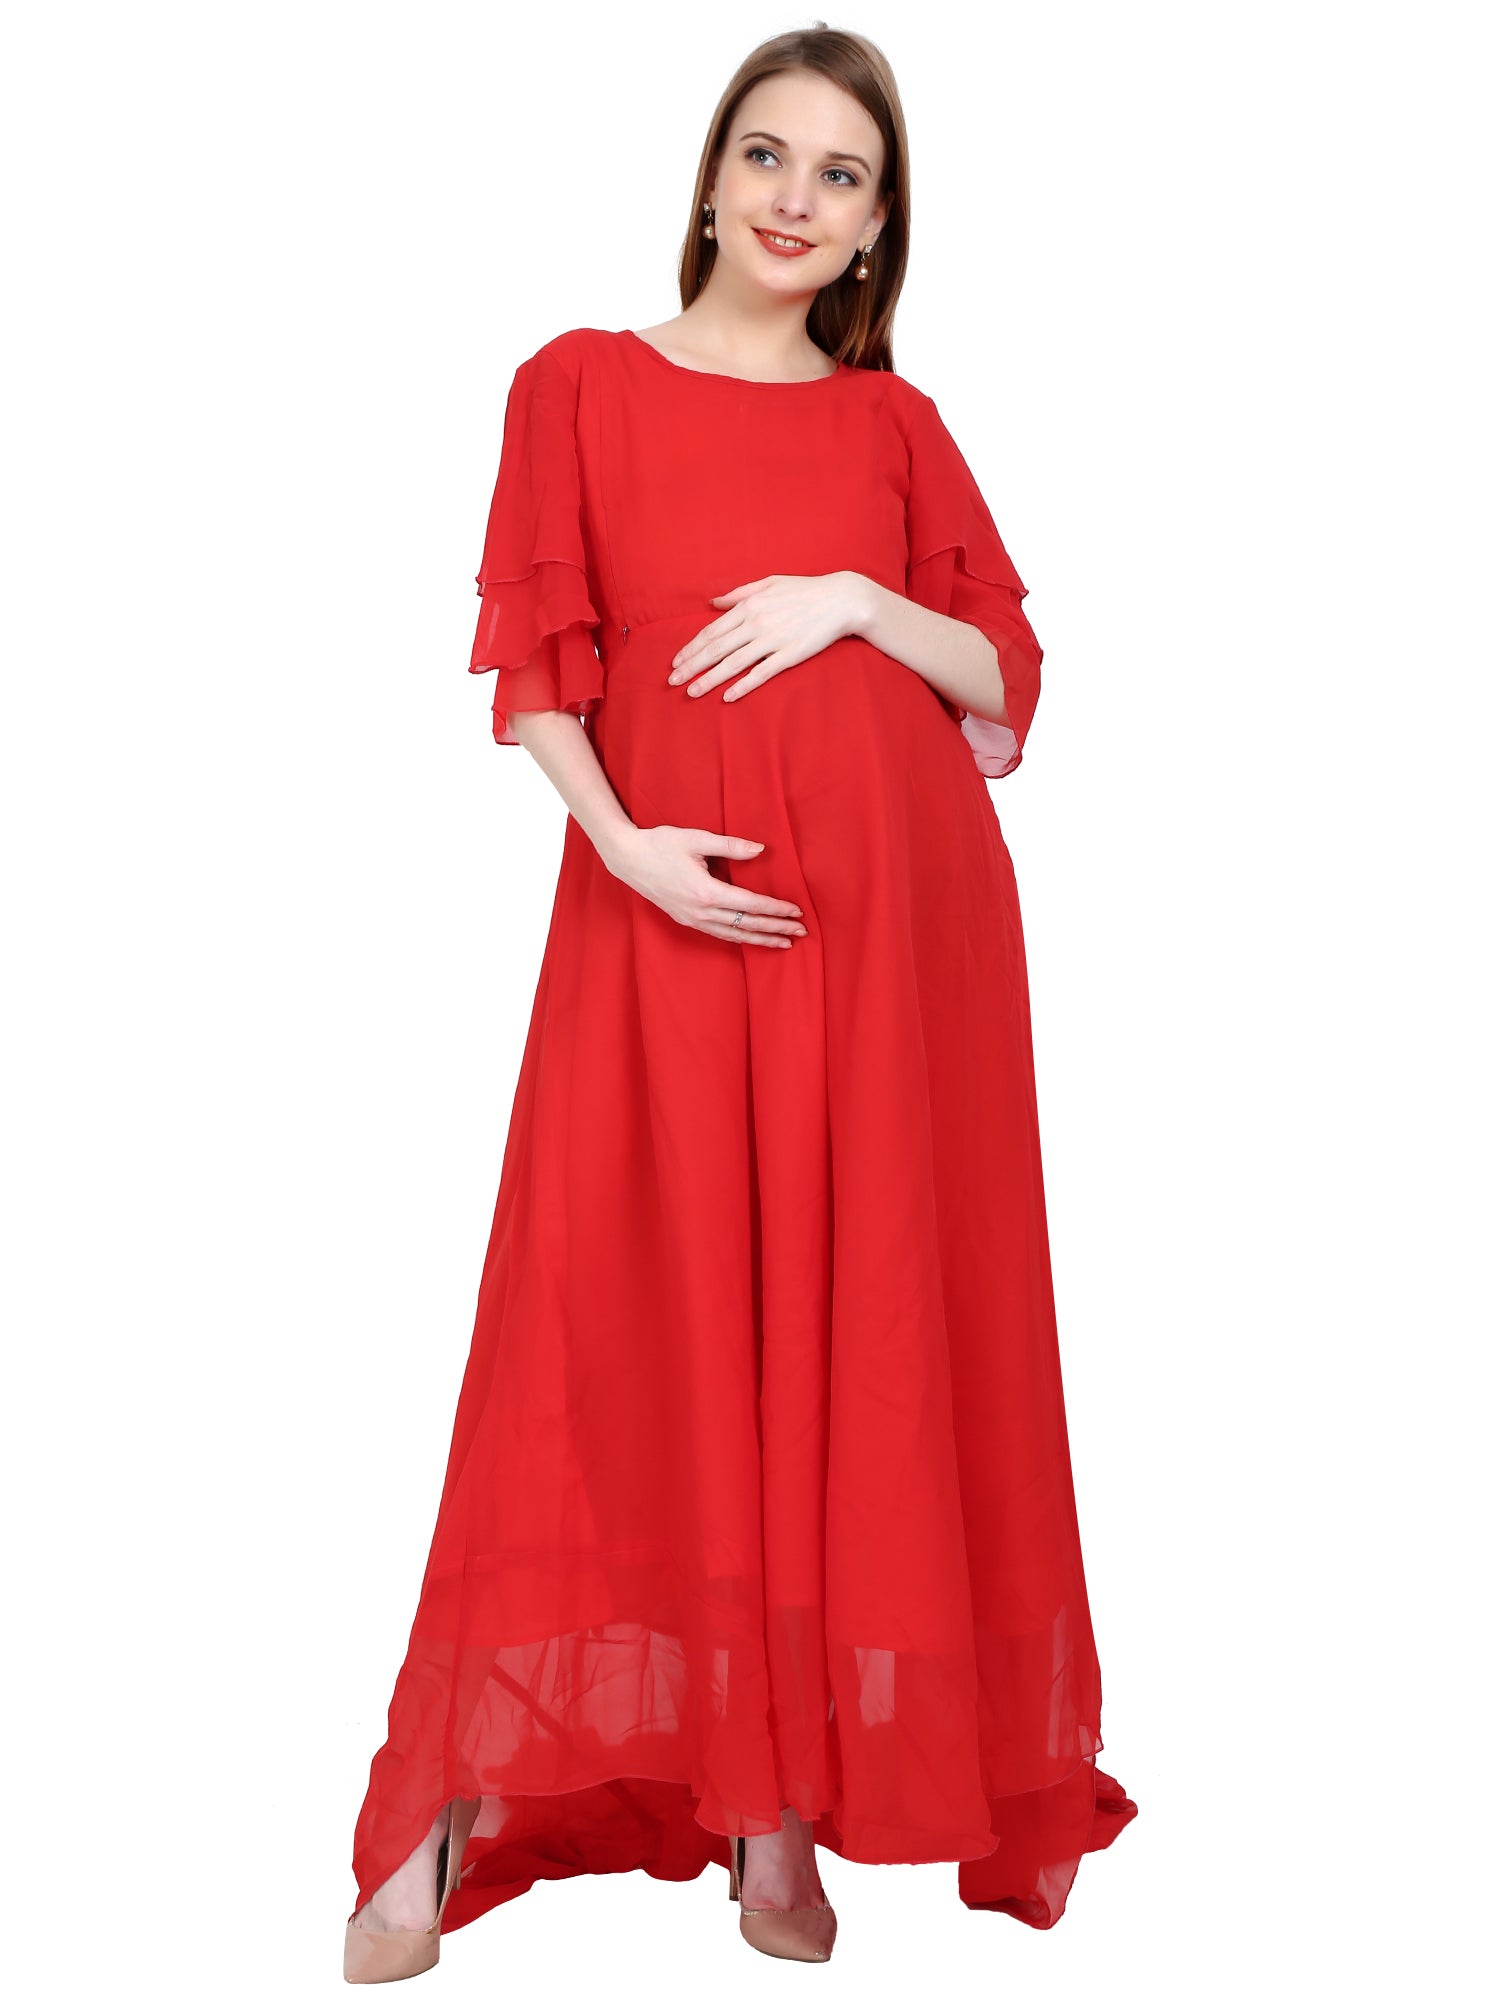 Shop Latest Range Of Maternity Outerwear Online At Best Offers